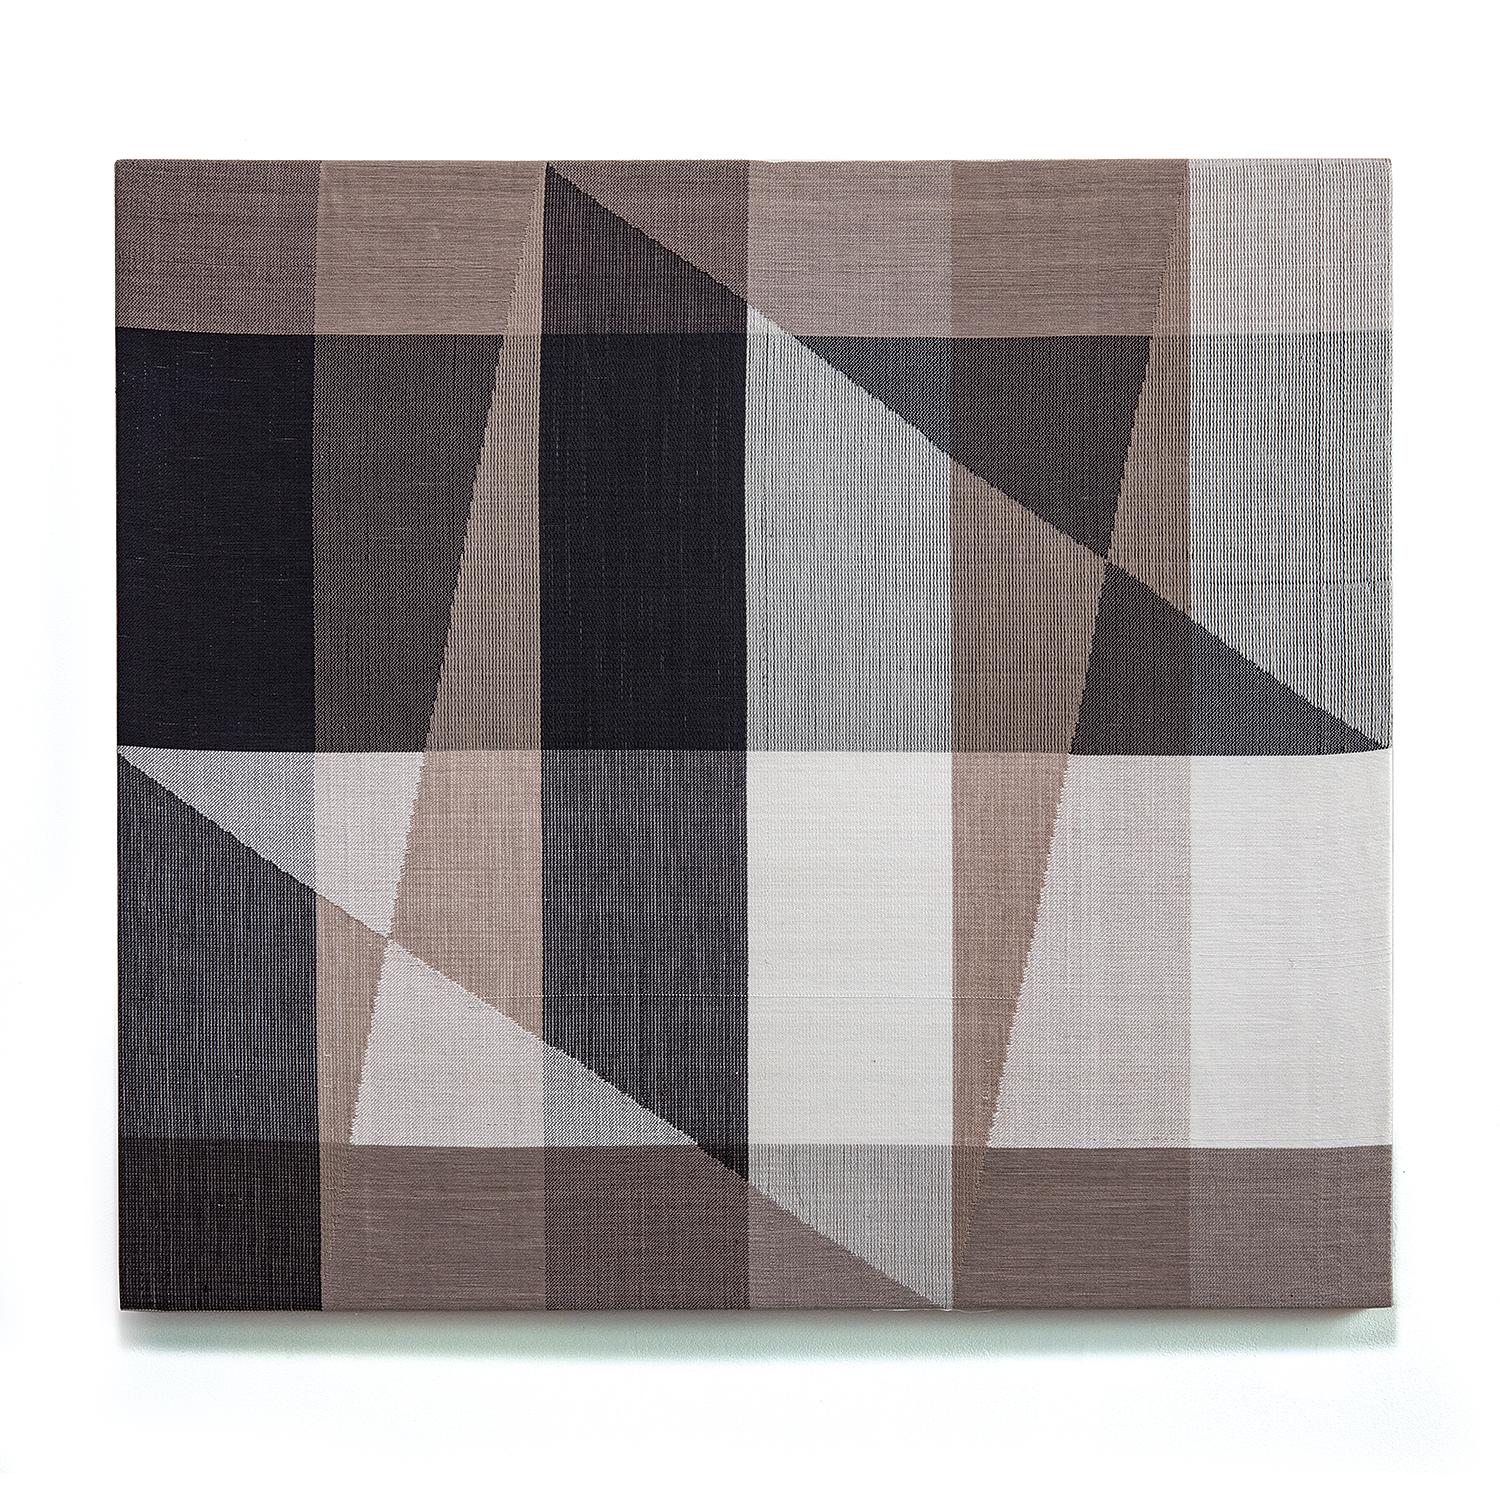 Ethel Stein Abstract Sculpture - Cityscape III, Contemporary Abstract Geometric Textile Wall Tapestry